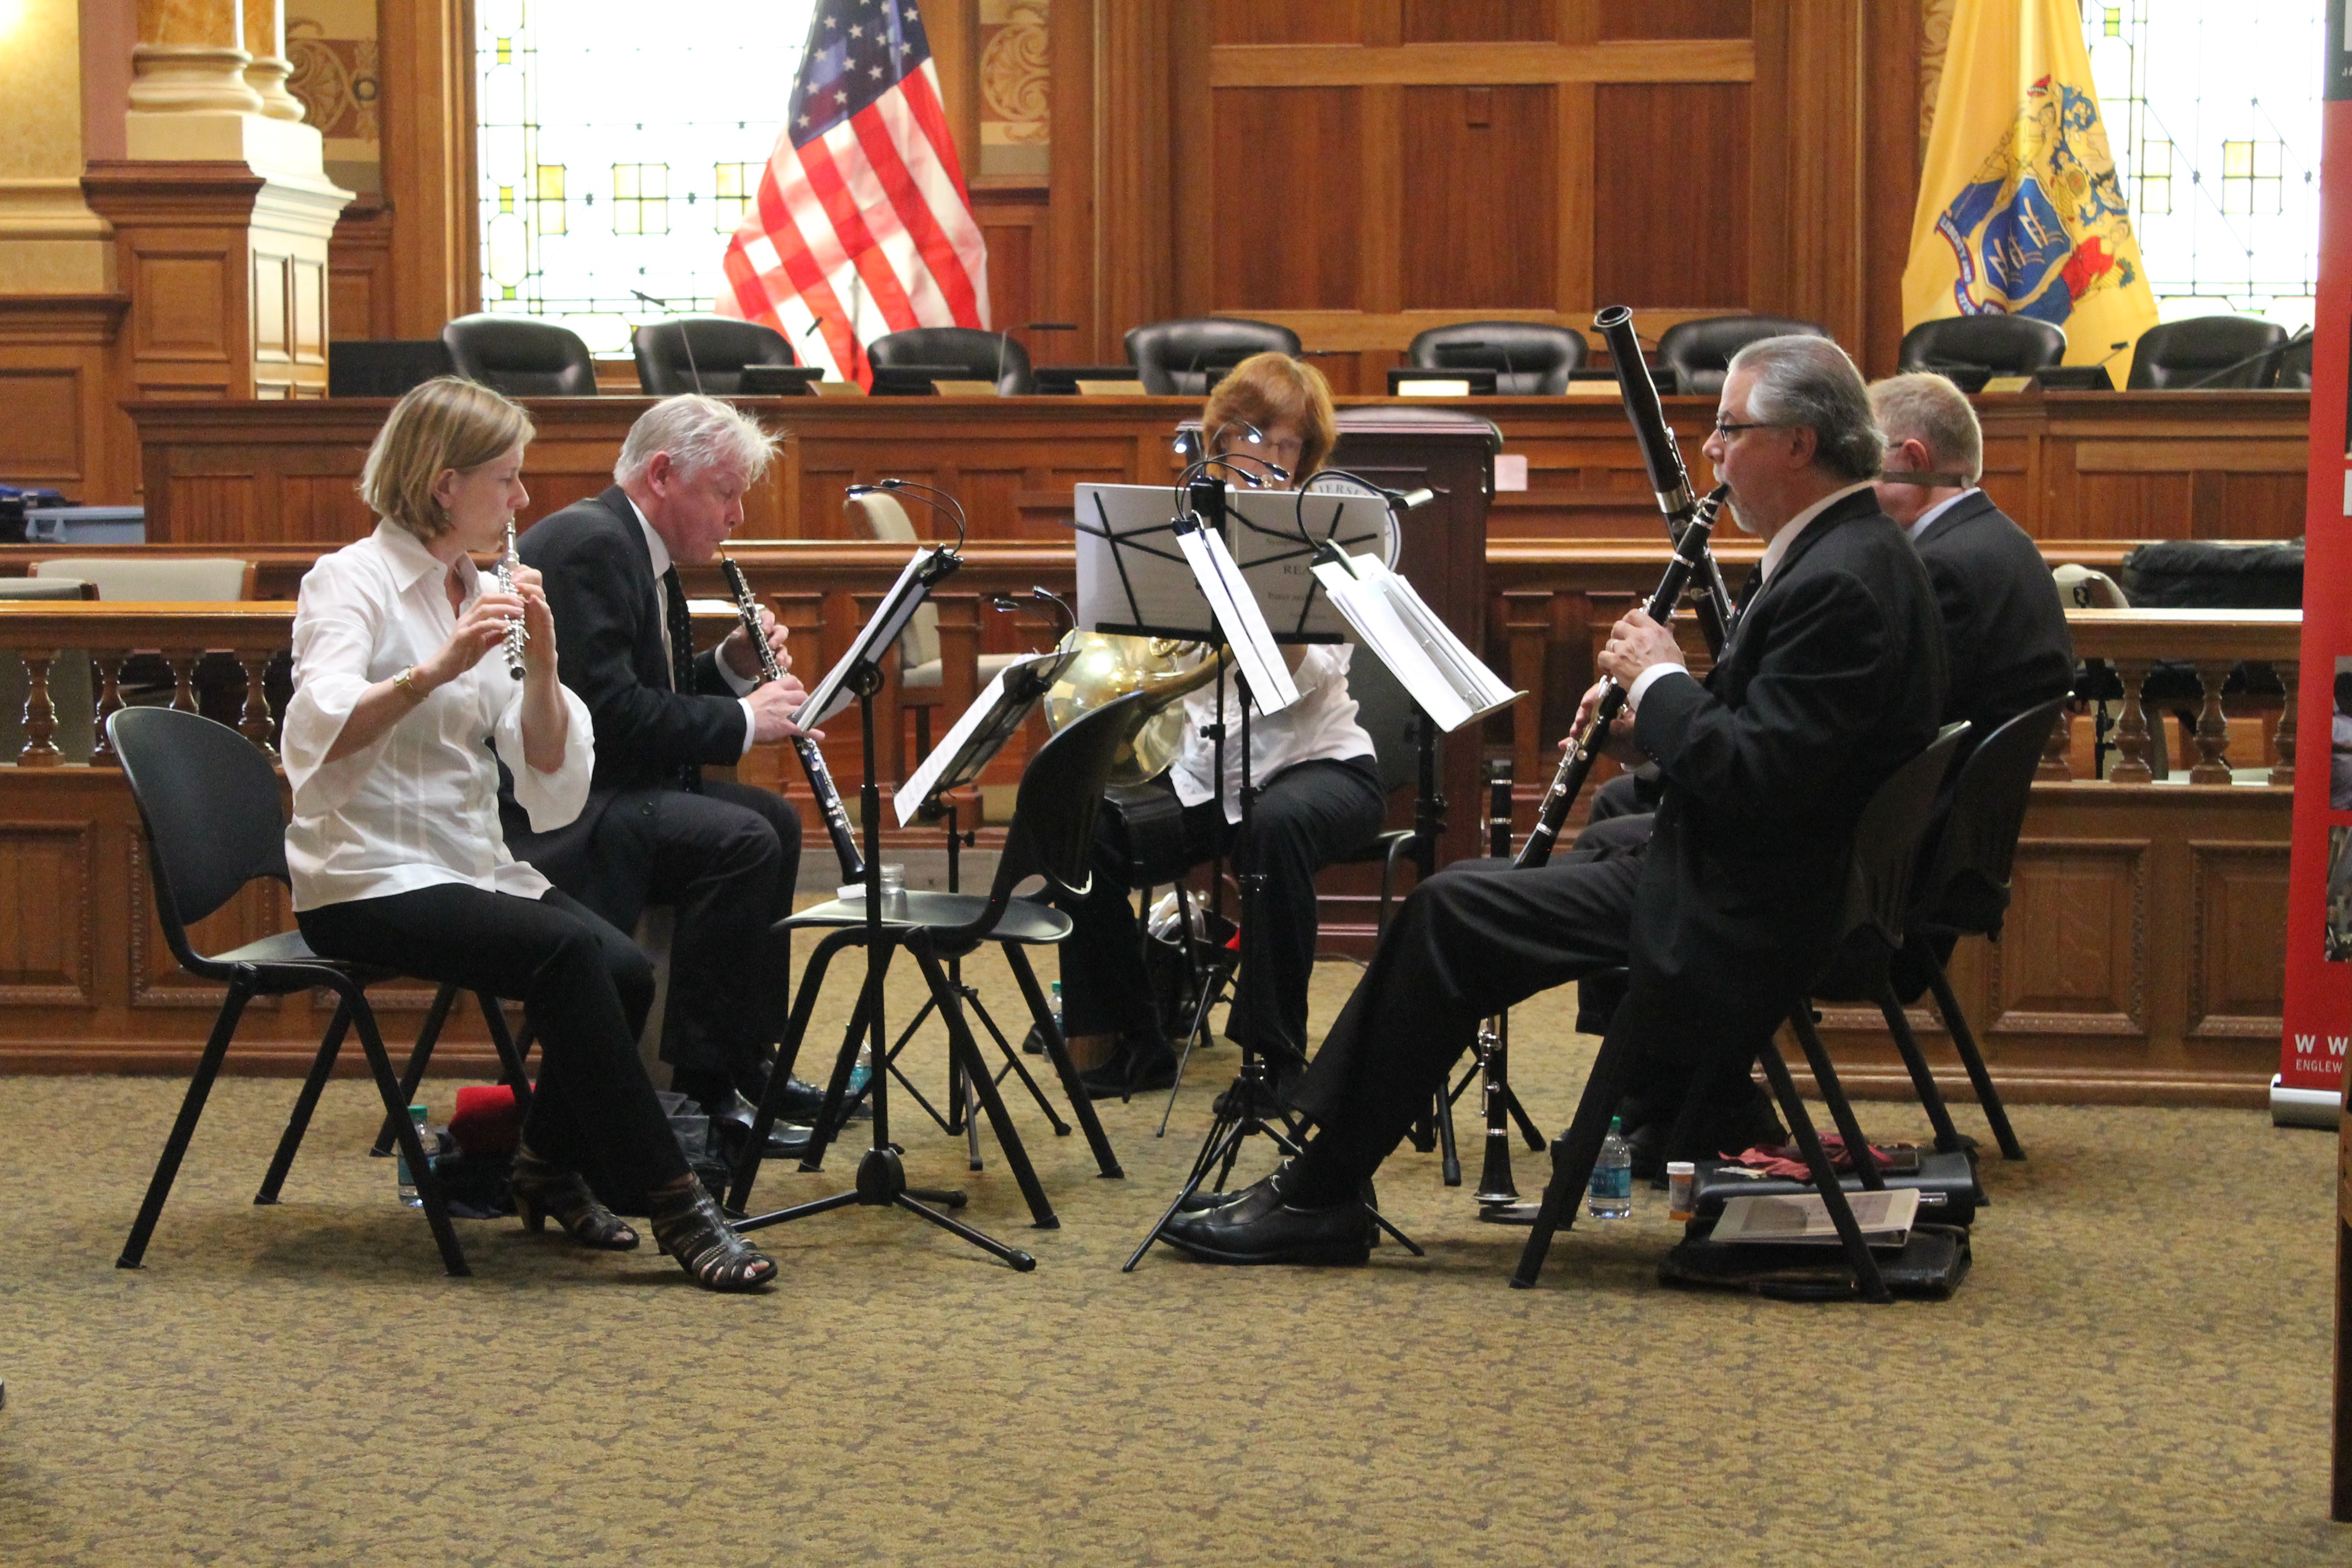 New Jersey Symphony Orchestra To Host Free Concerts In Jersey City